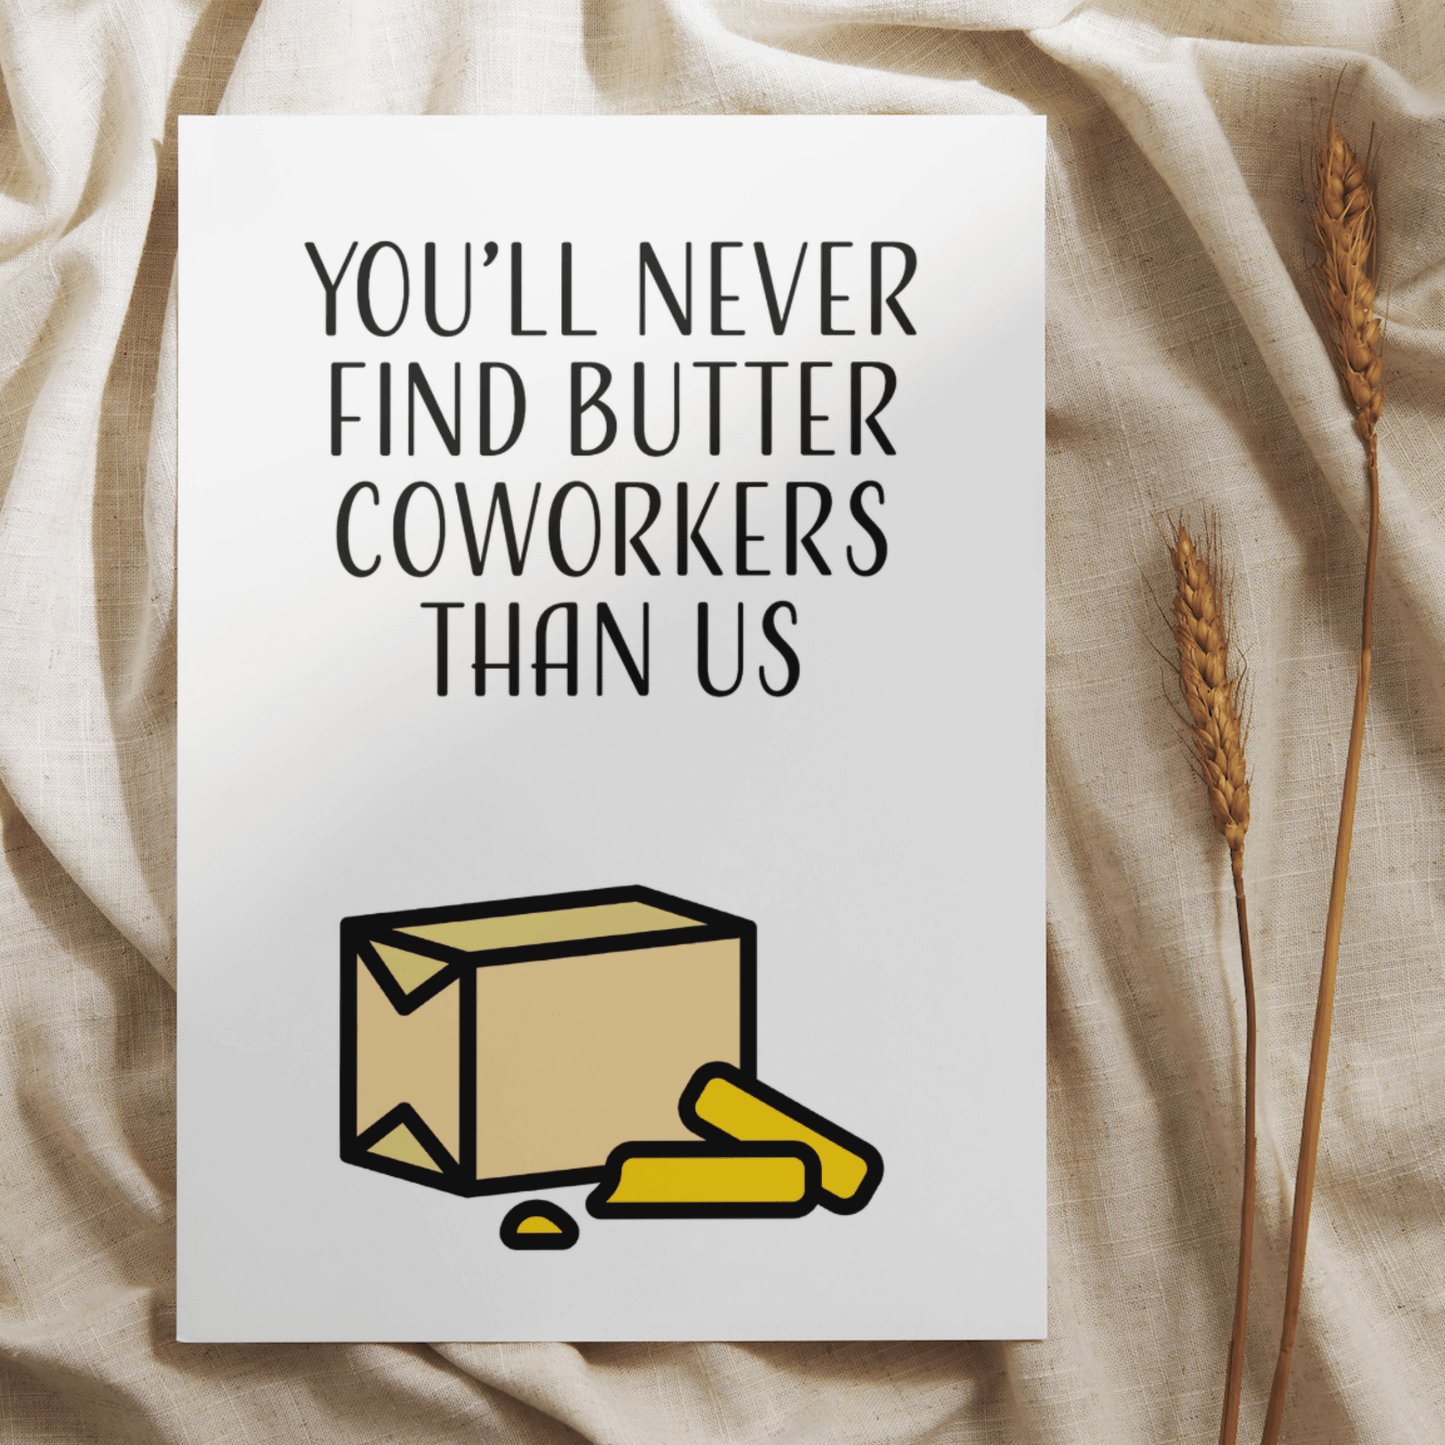 Little Kraken's You'll Never Find Butter Coworkers Than Us, Leaving Cards for £3.50 each